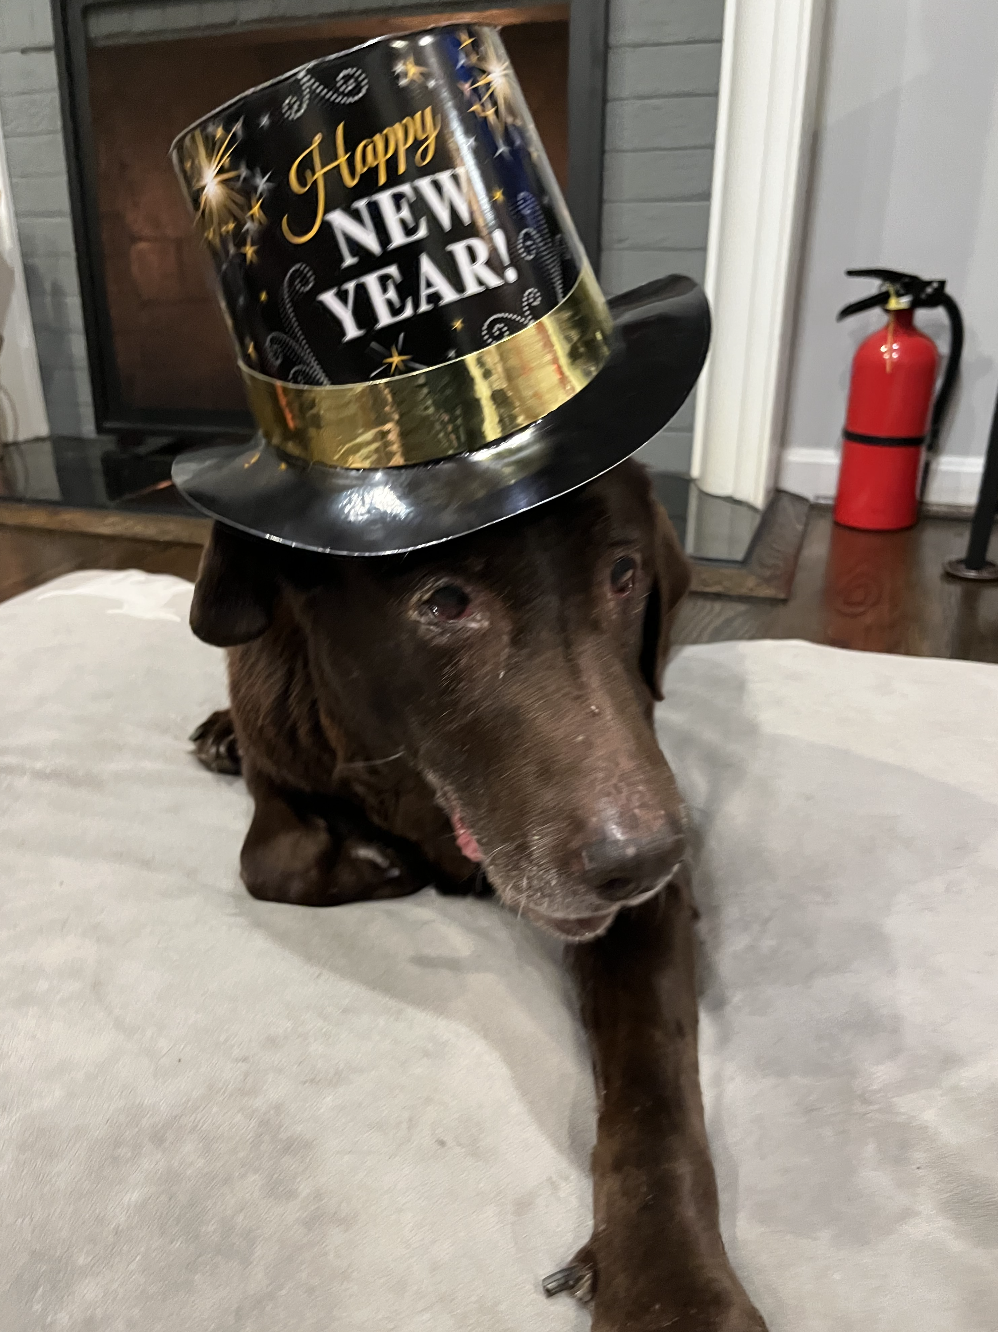 A chocolate lab in a Happy New Year hat.